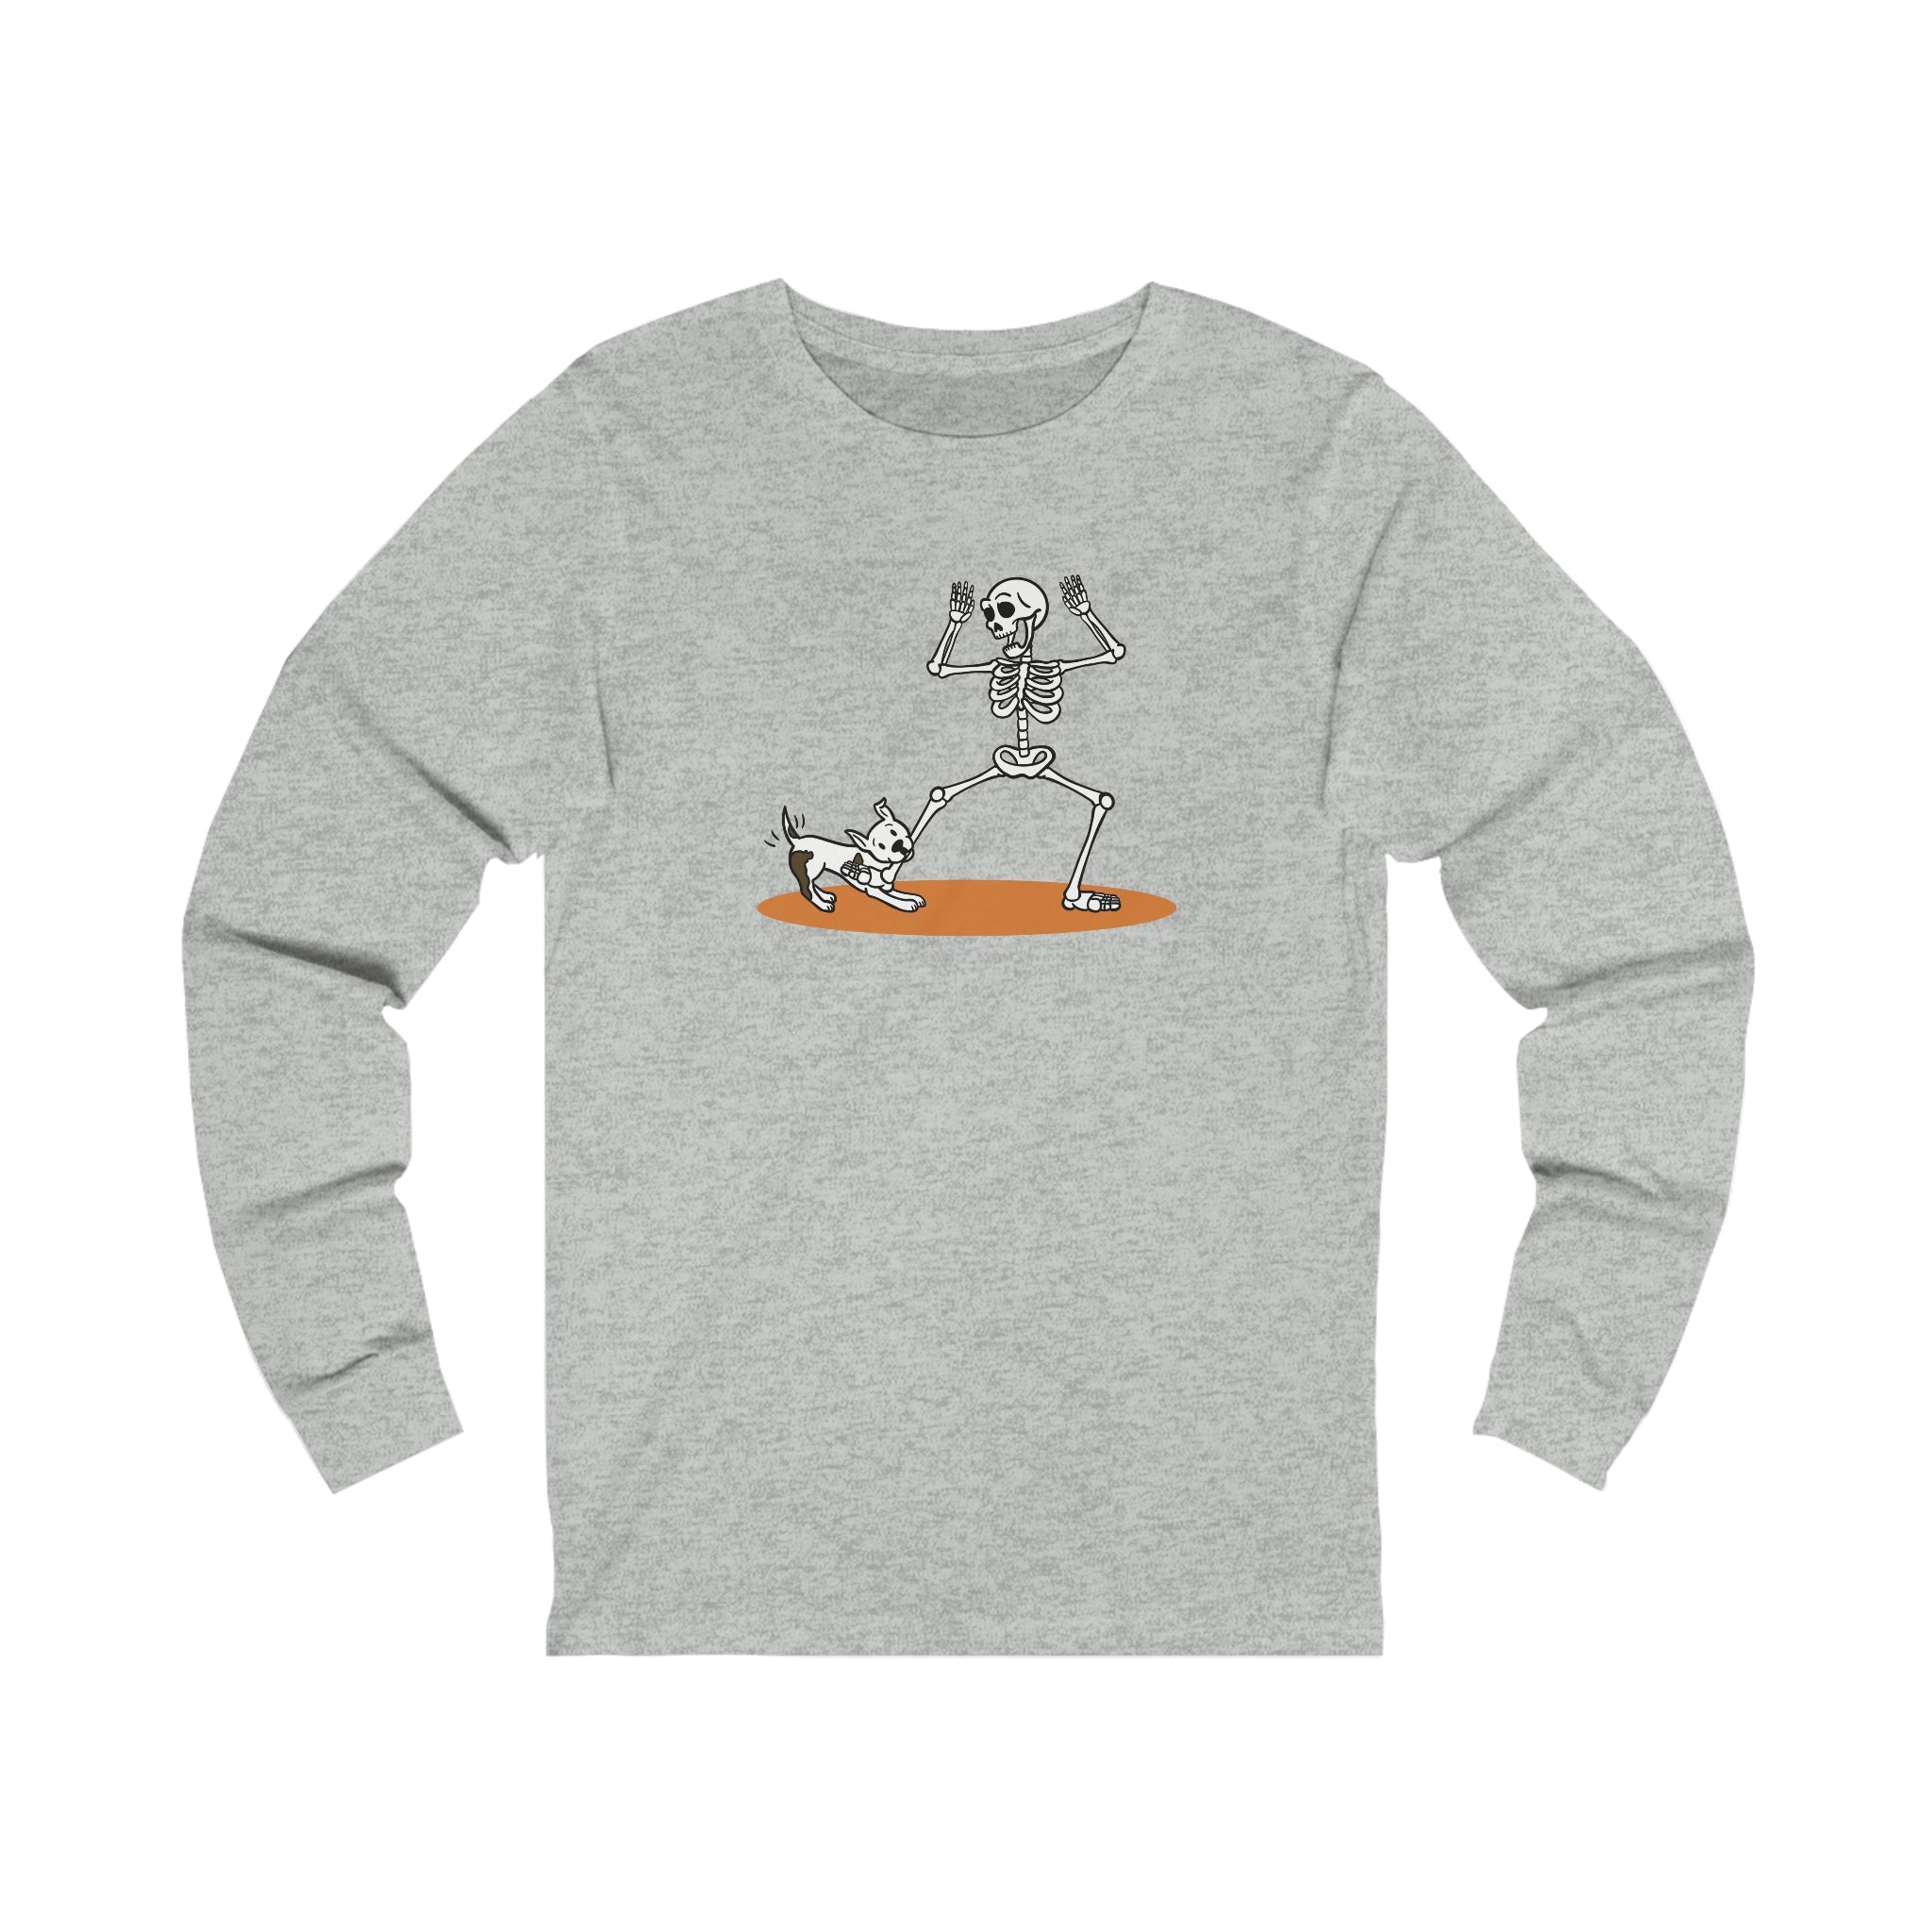 Hey That's My Leg Long Sleeve Tee - TAILWAGS UNLIMITED